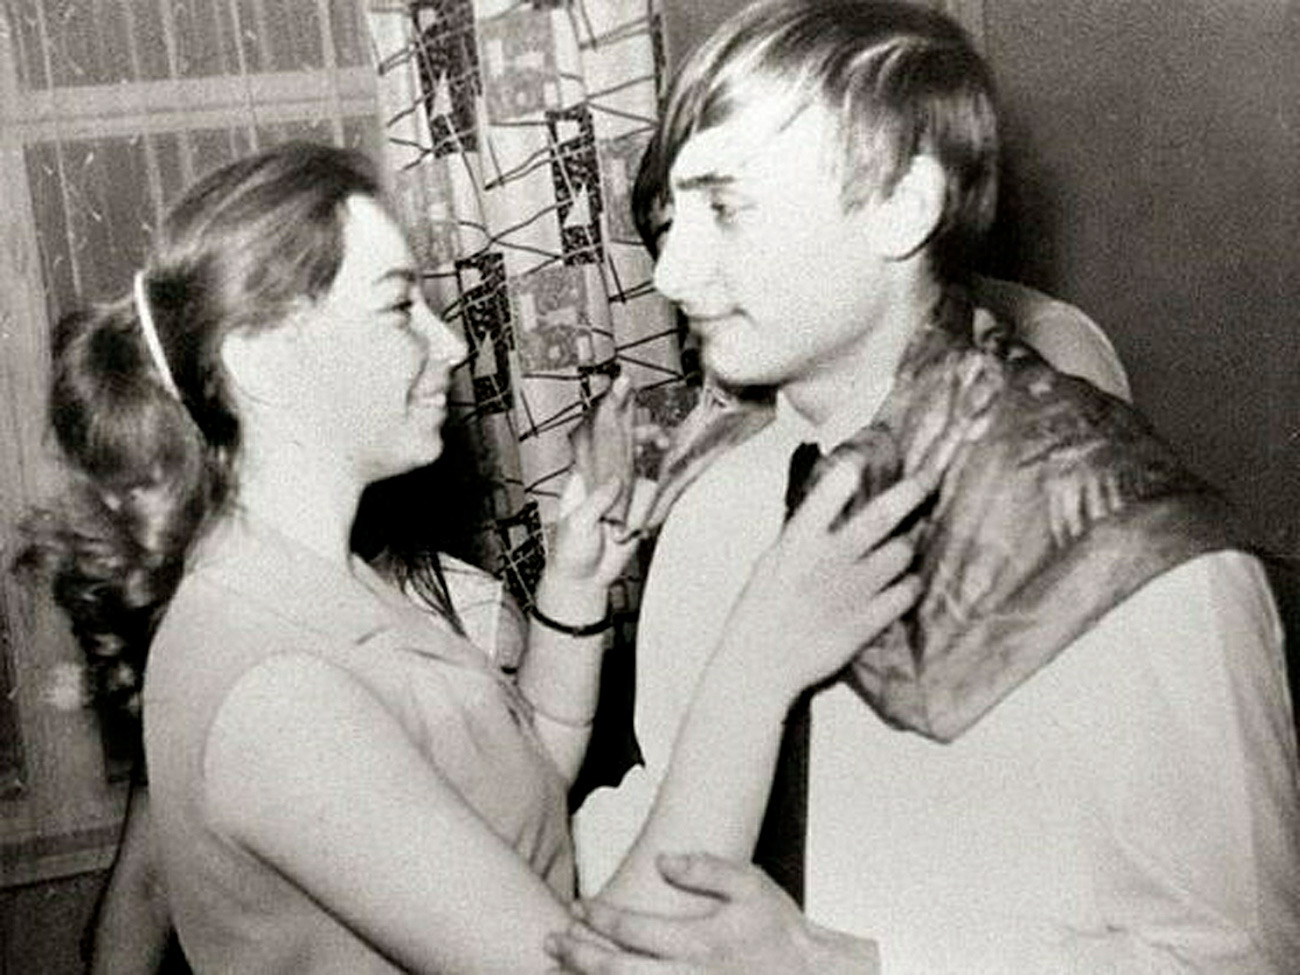 Putin is dancing with his classmate Elena during a party in St. Petersburg in 1970